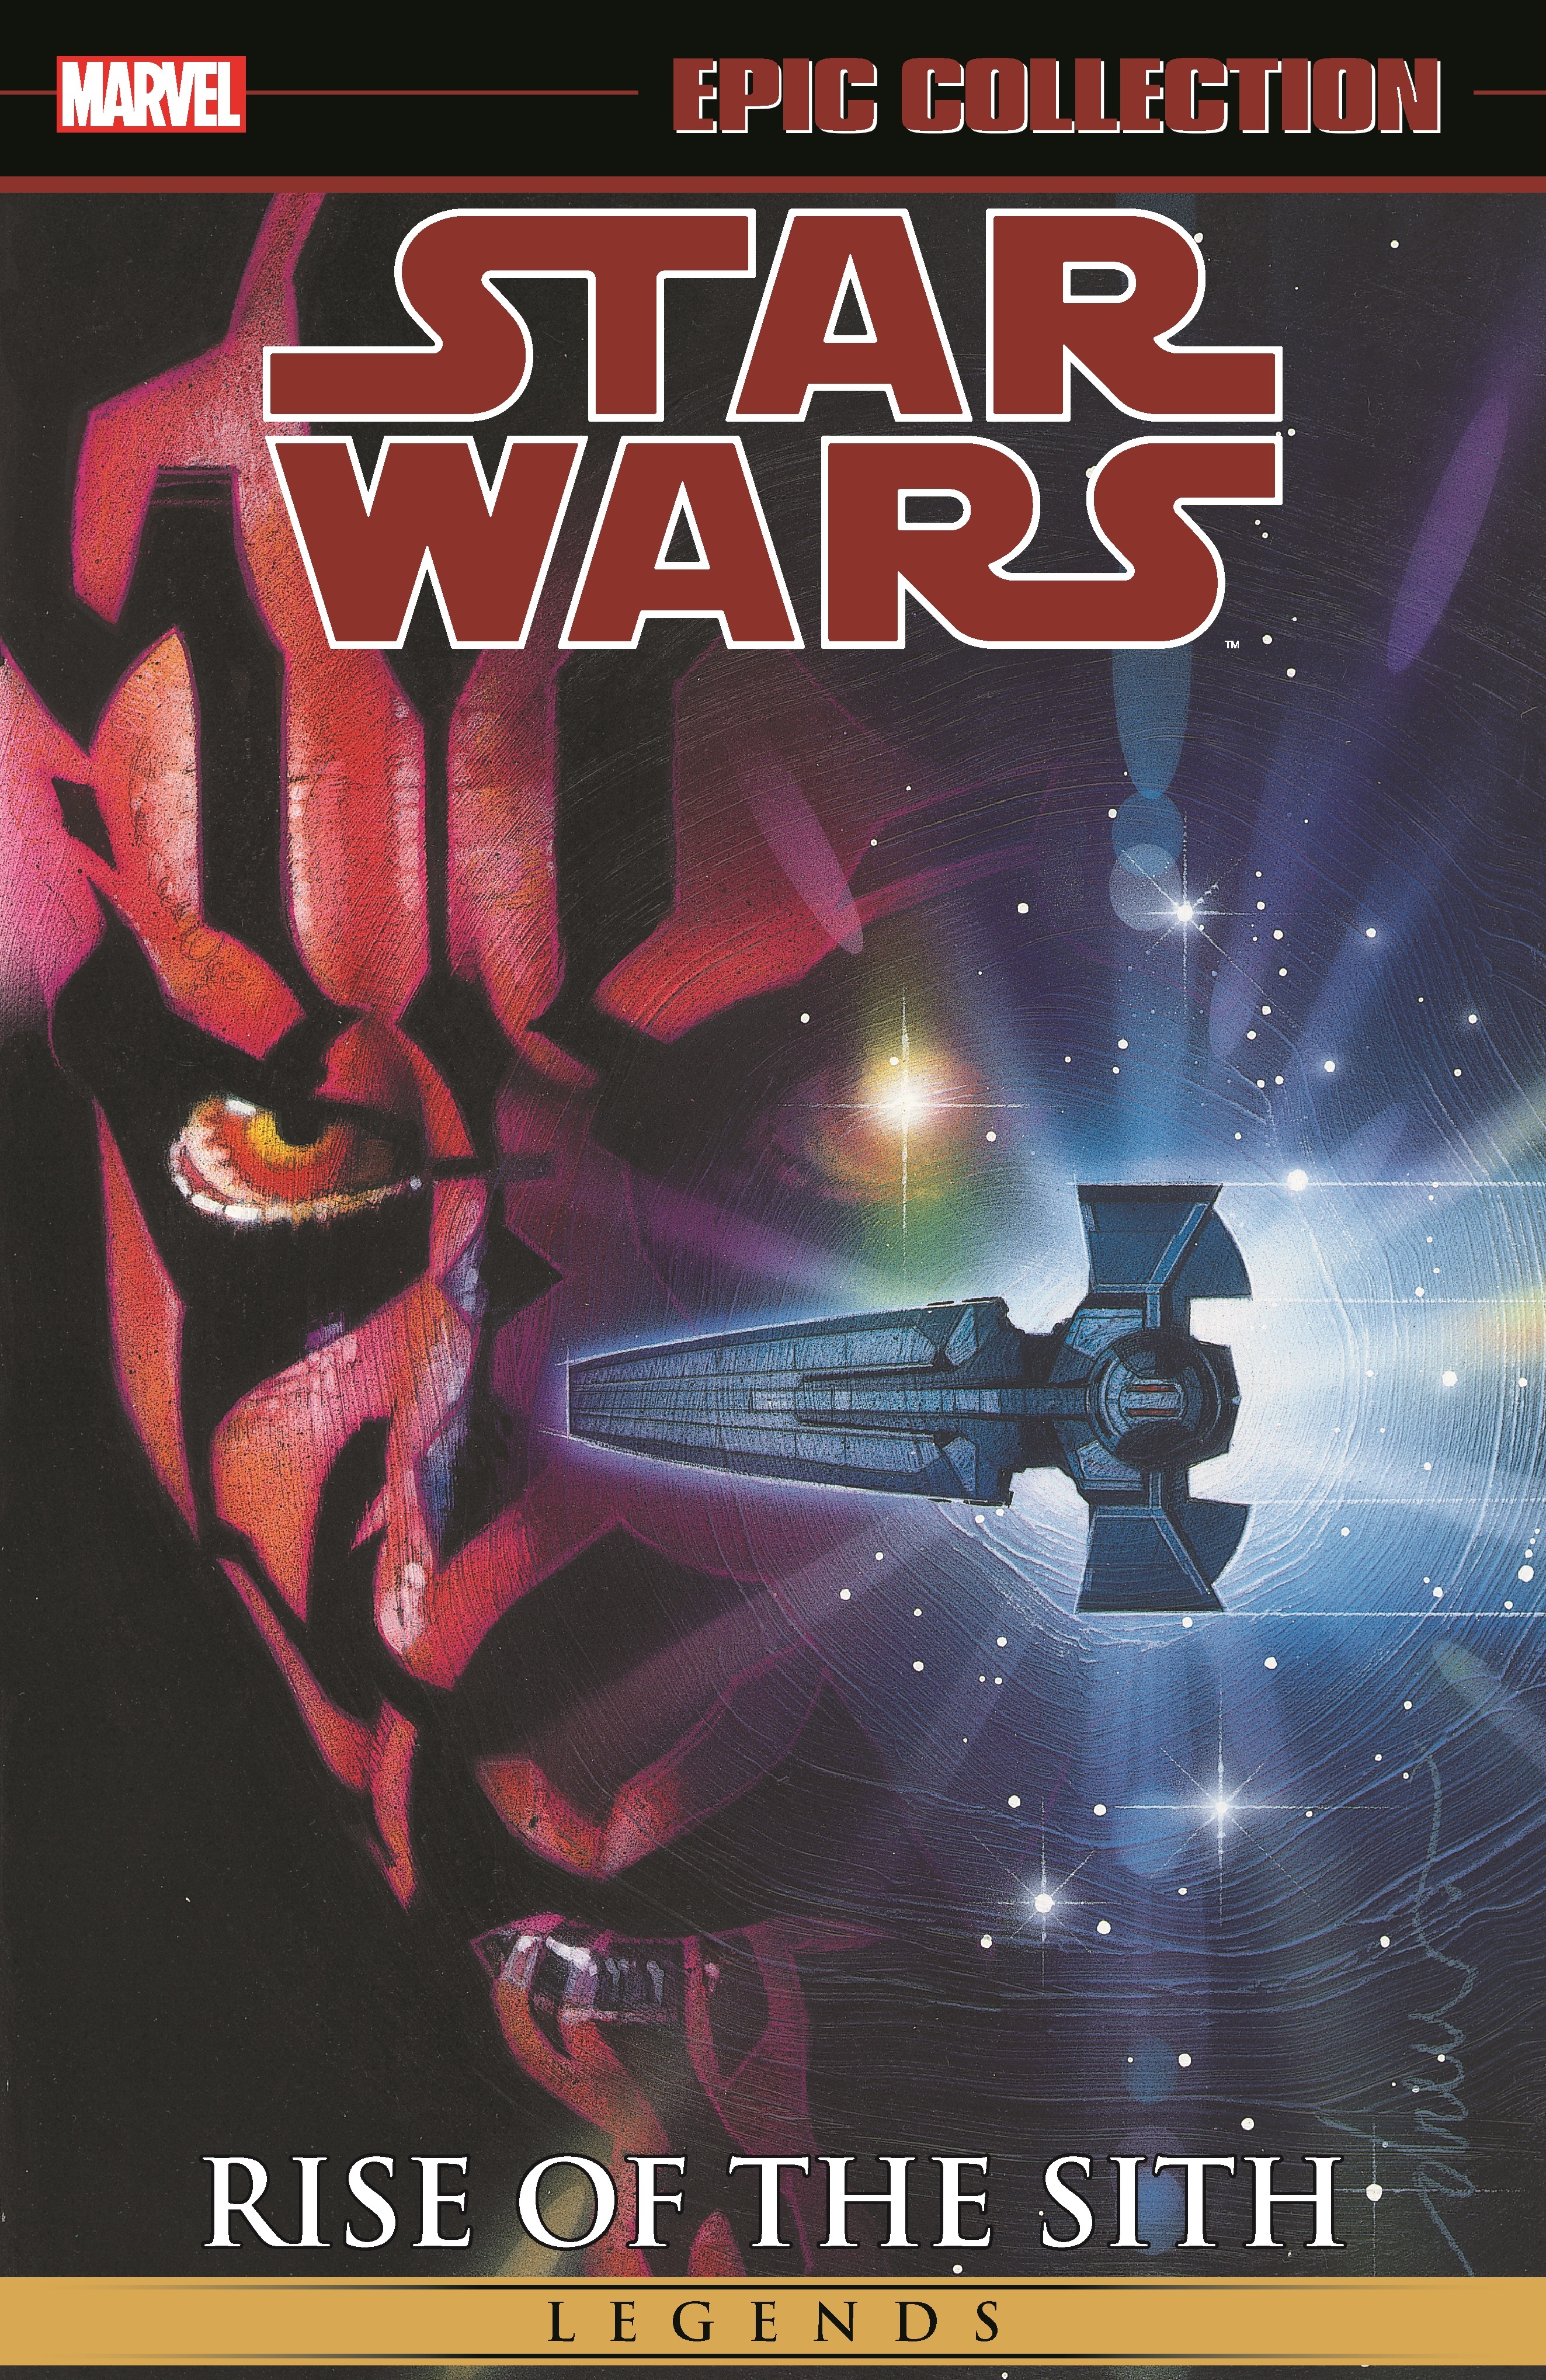 STAR WARS LEGENDS EPIC COLLECTION: RISE OF THE SITH VOL. 2 TPB (Trade Paperback)